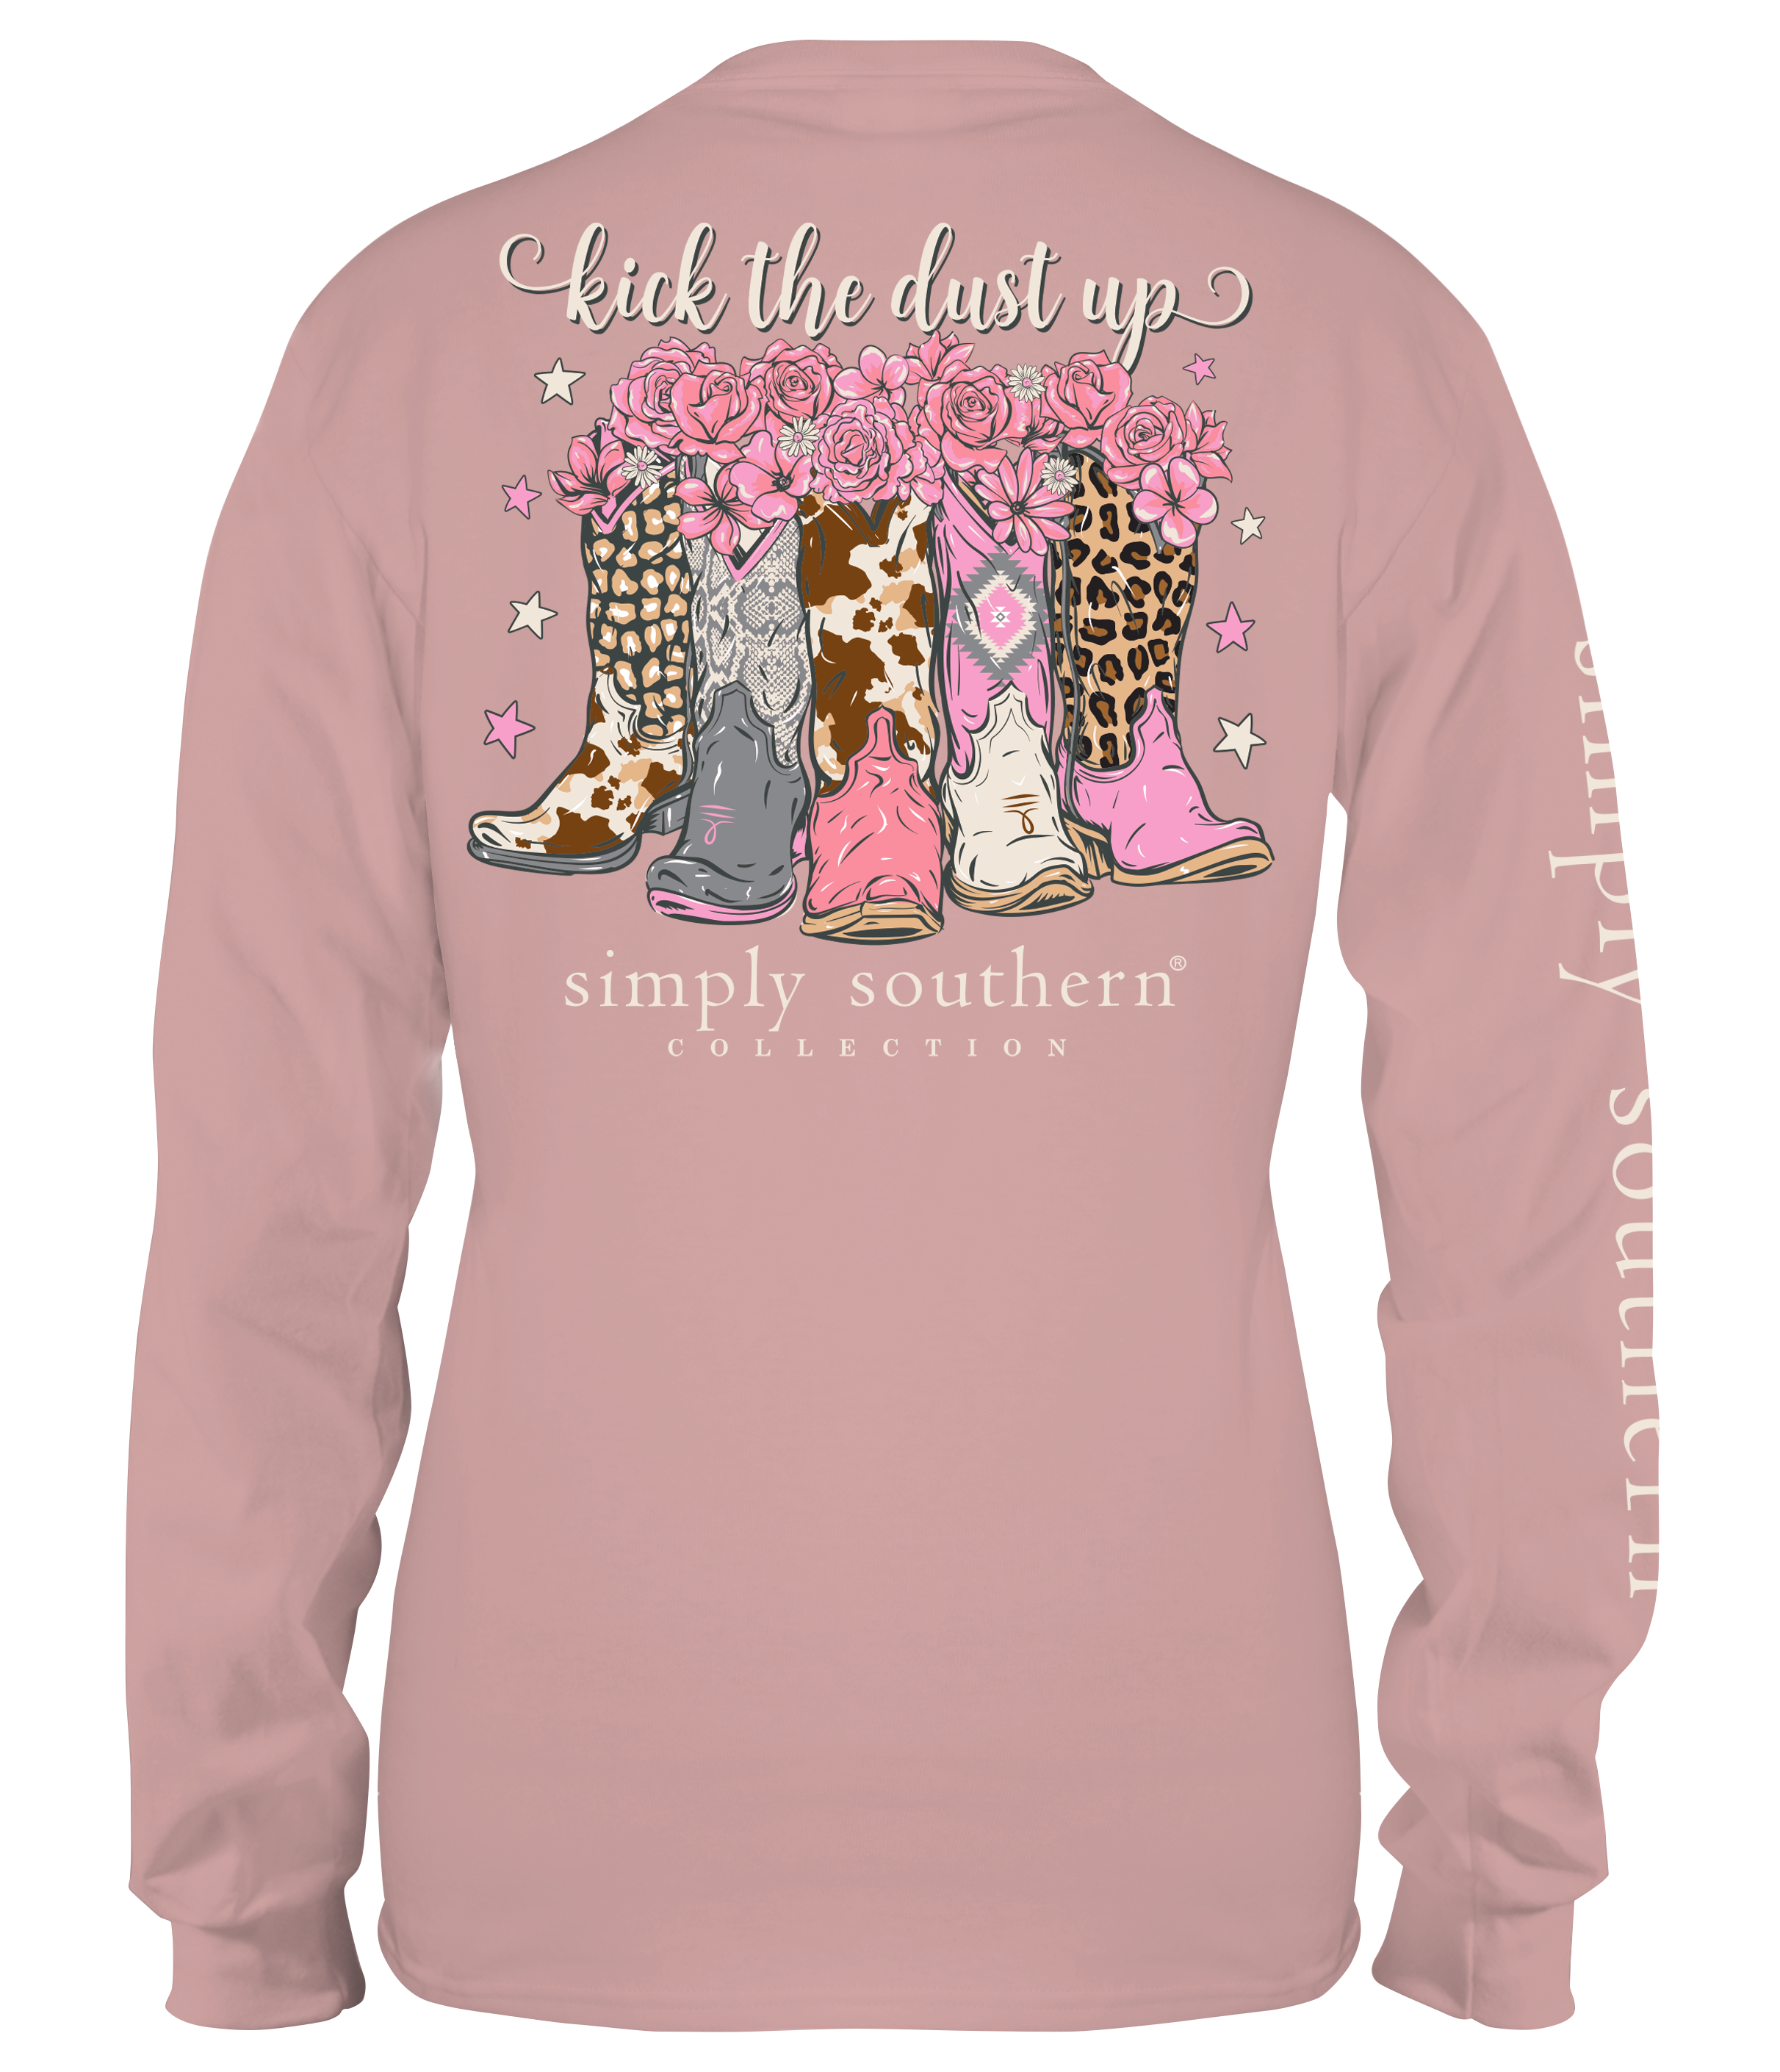 'Kick The Dust Up' Cowboy Boots Long Sleeve Tee by Simply Southern